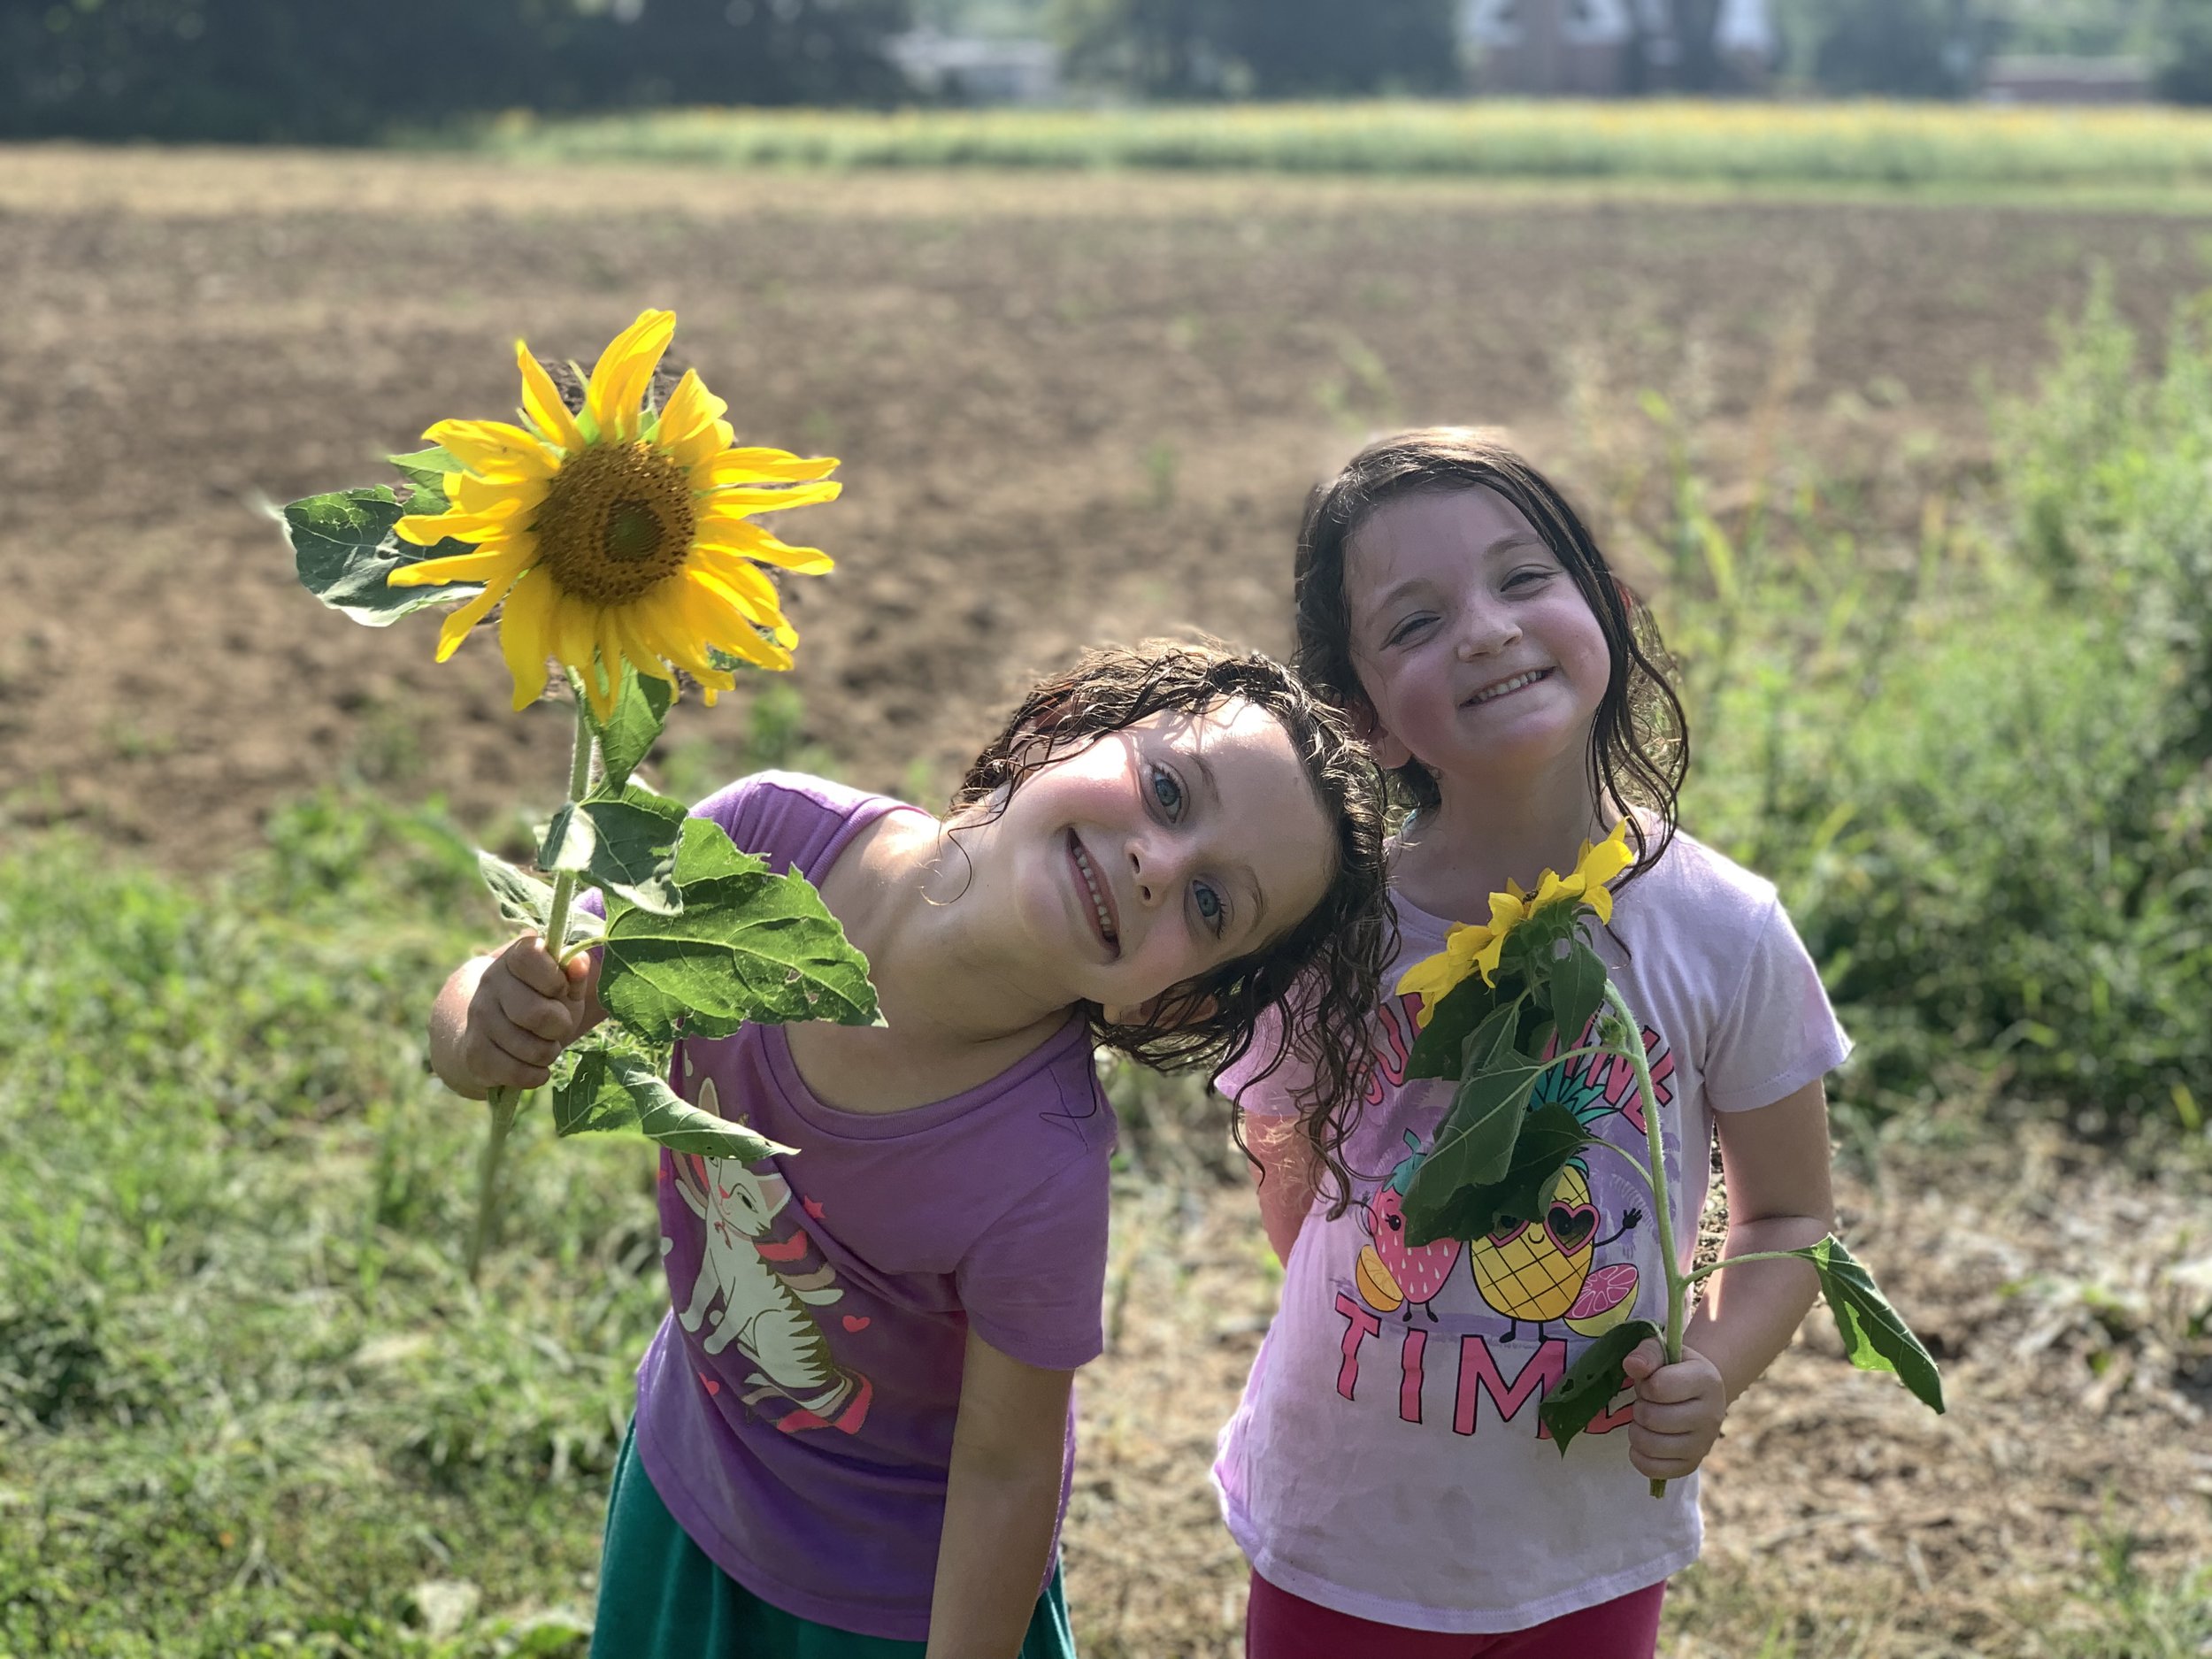  Two children holding sunflowers in a field 